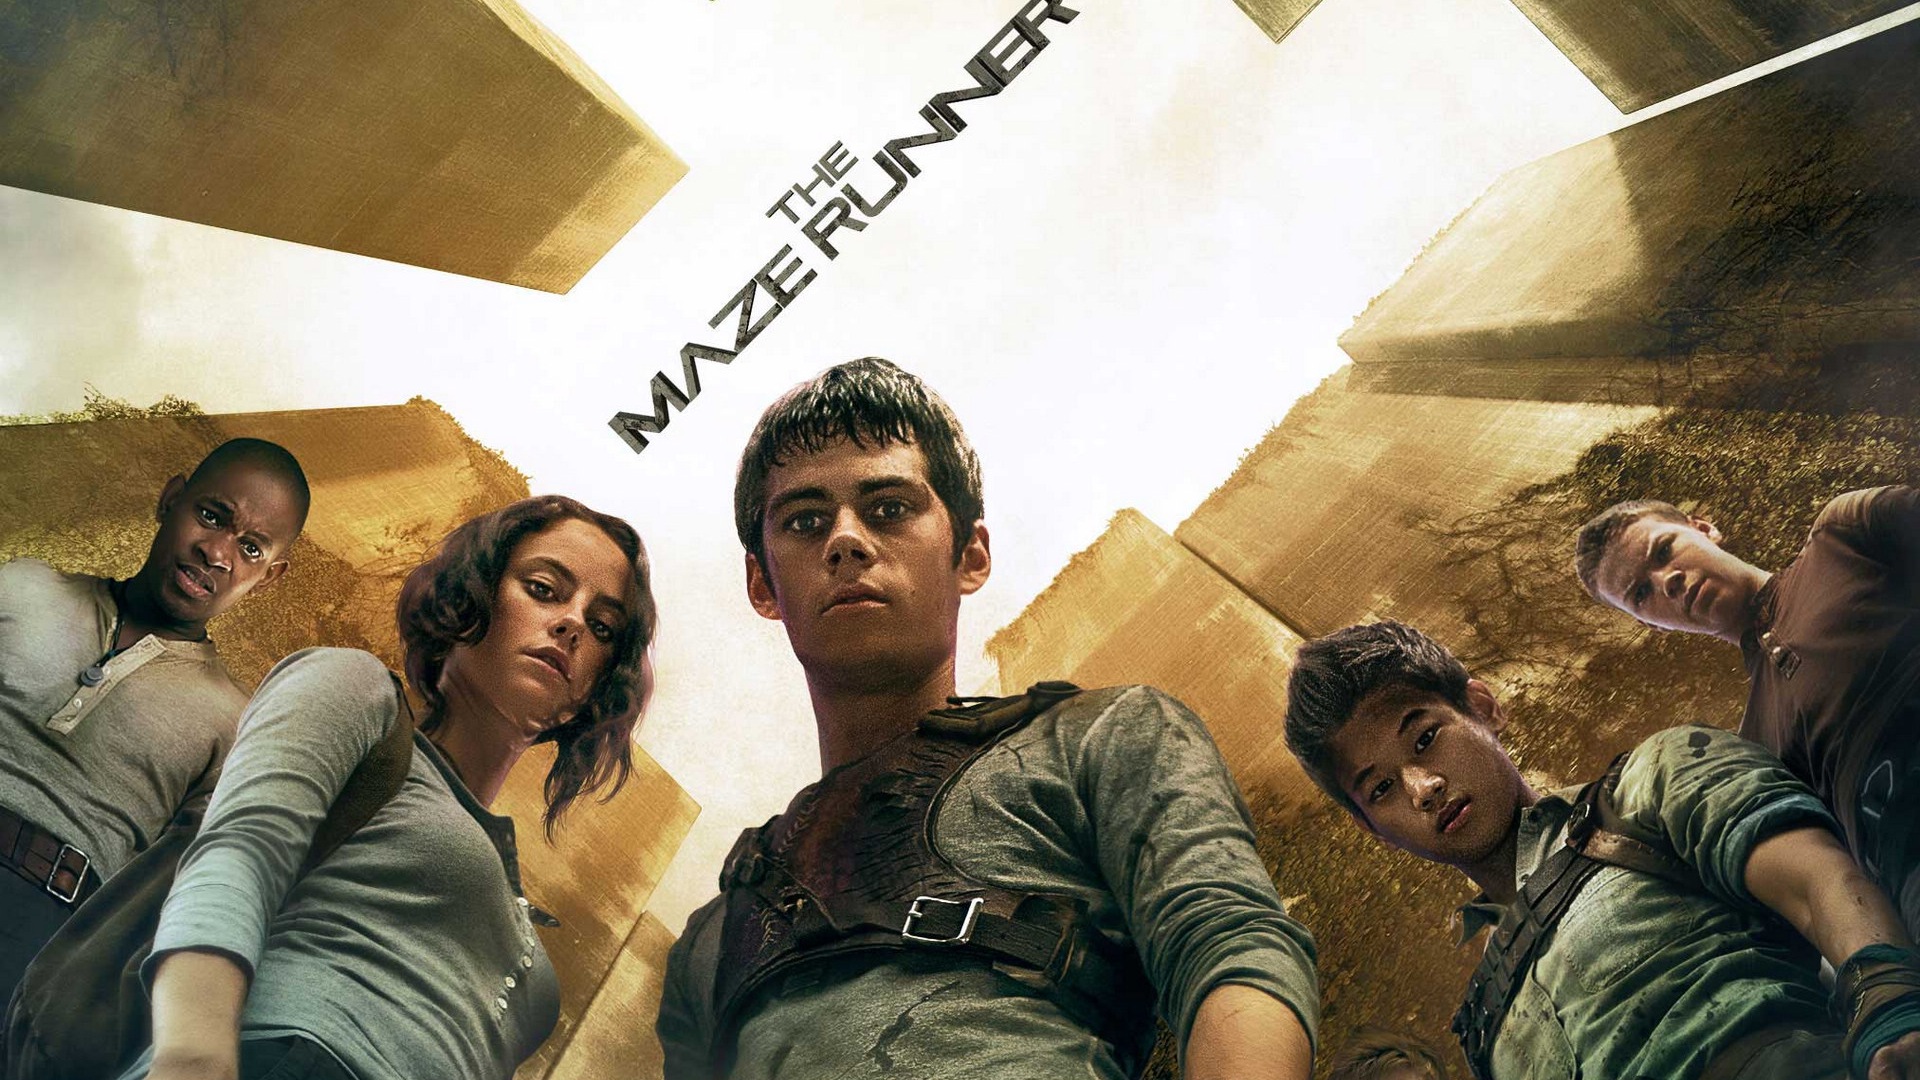 The Maze Runner HD movie wallpapers #4 - 1920x1080